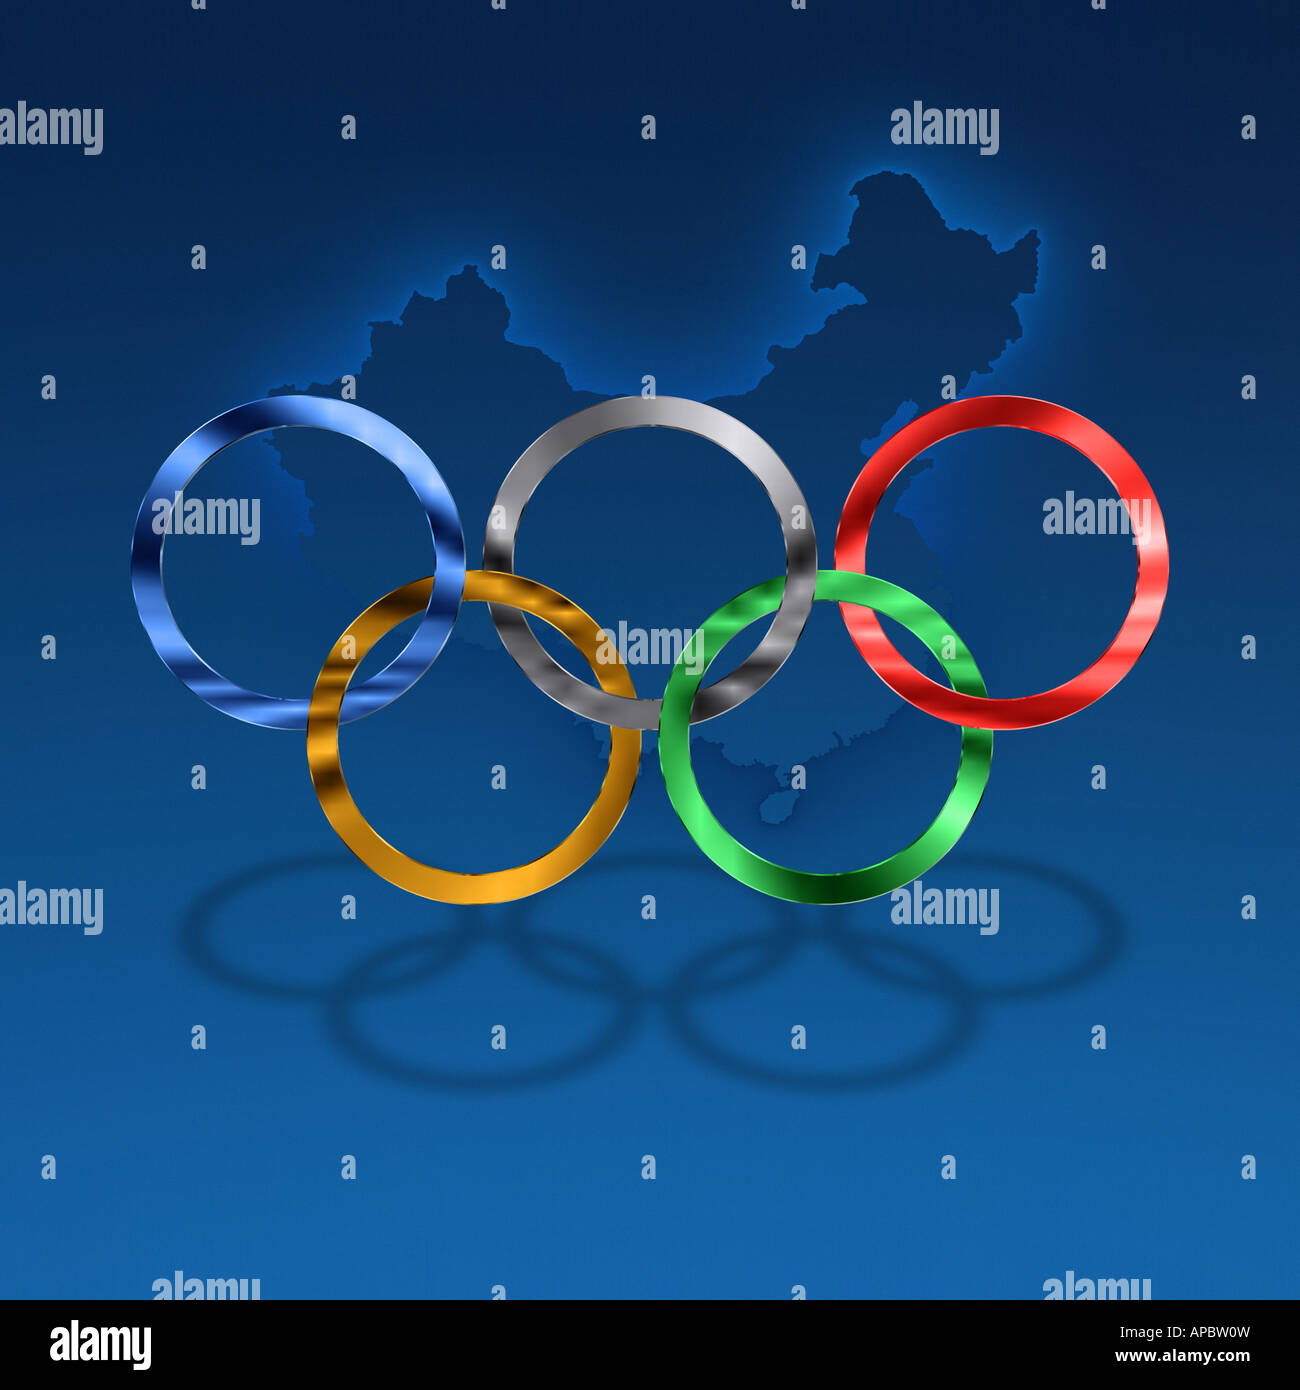 Olympic rings against a nice blue gradated background including subtle outline of China Stock Photo